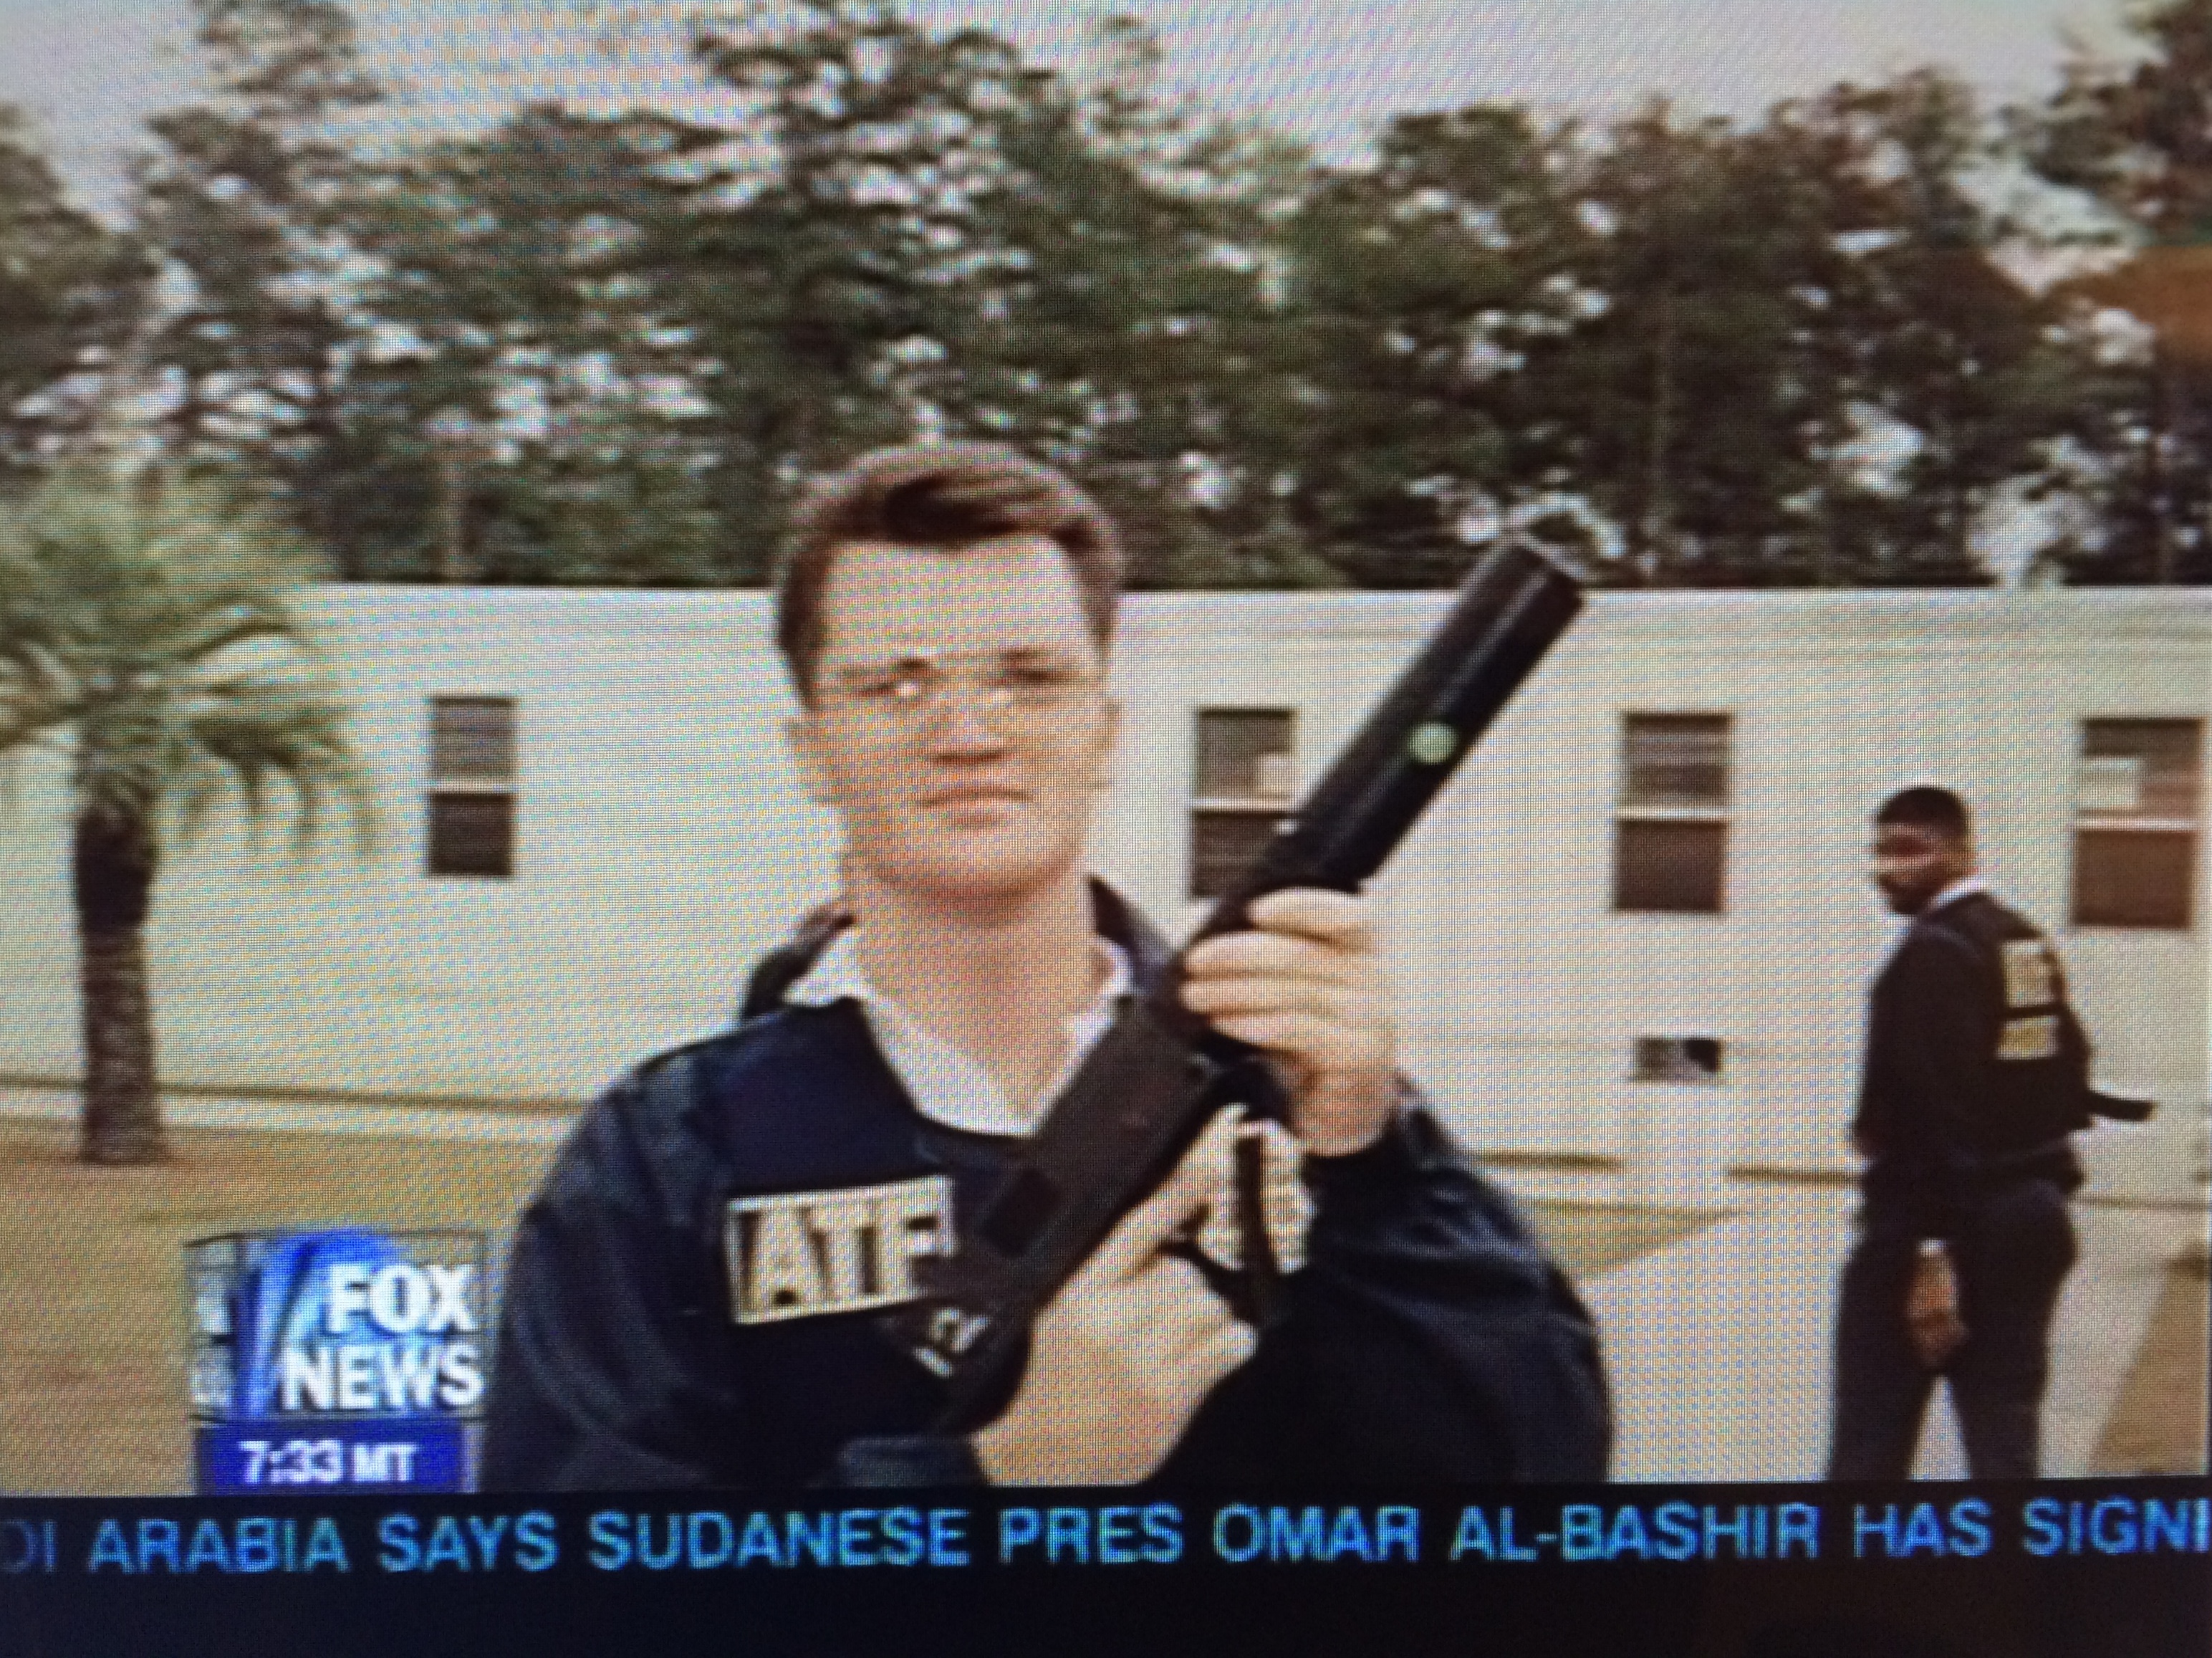 And old photo of Chuck Hustmyre used on Fox News.